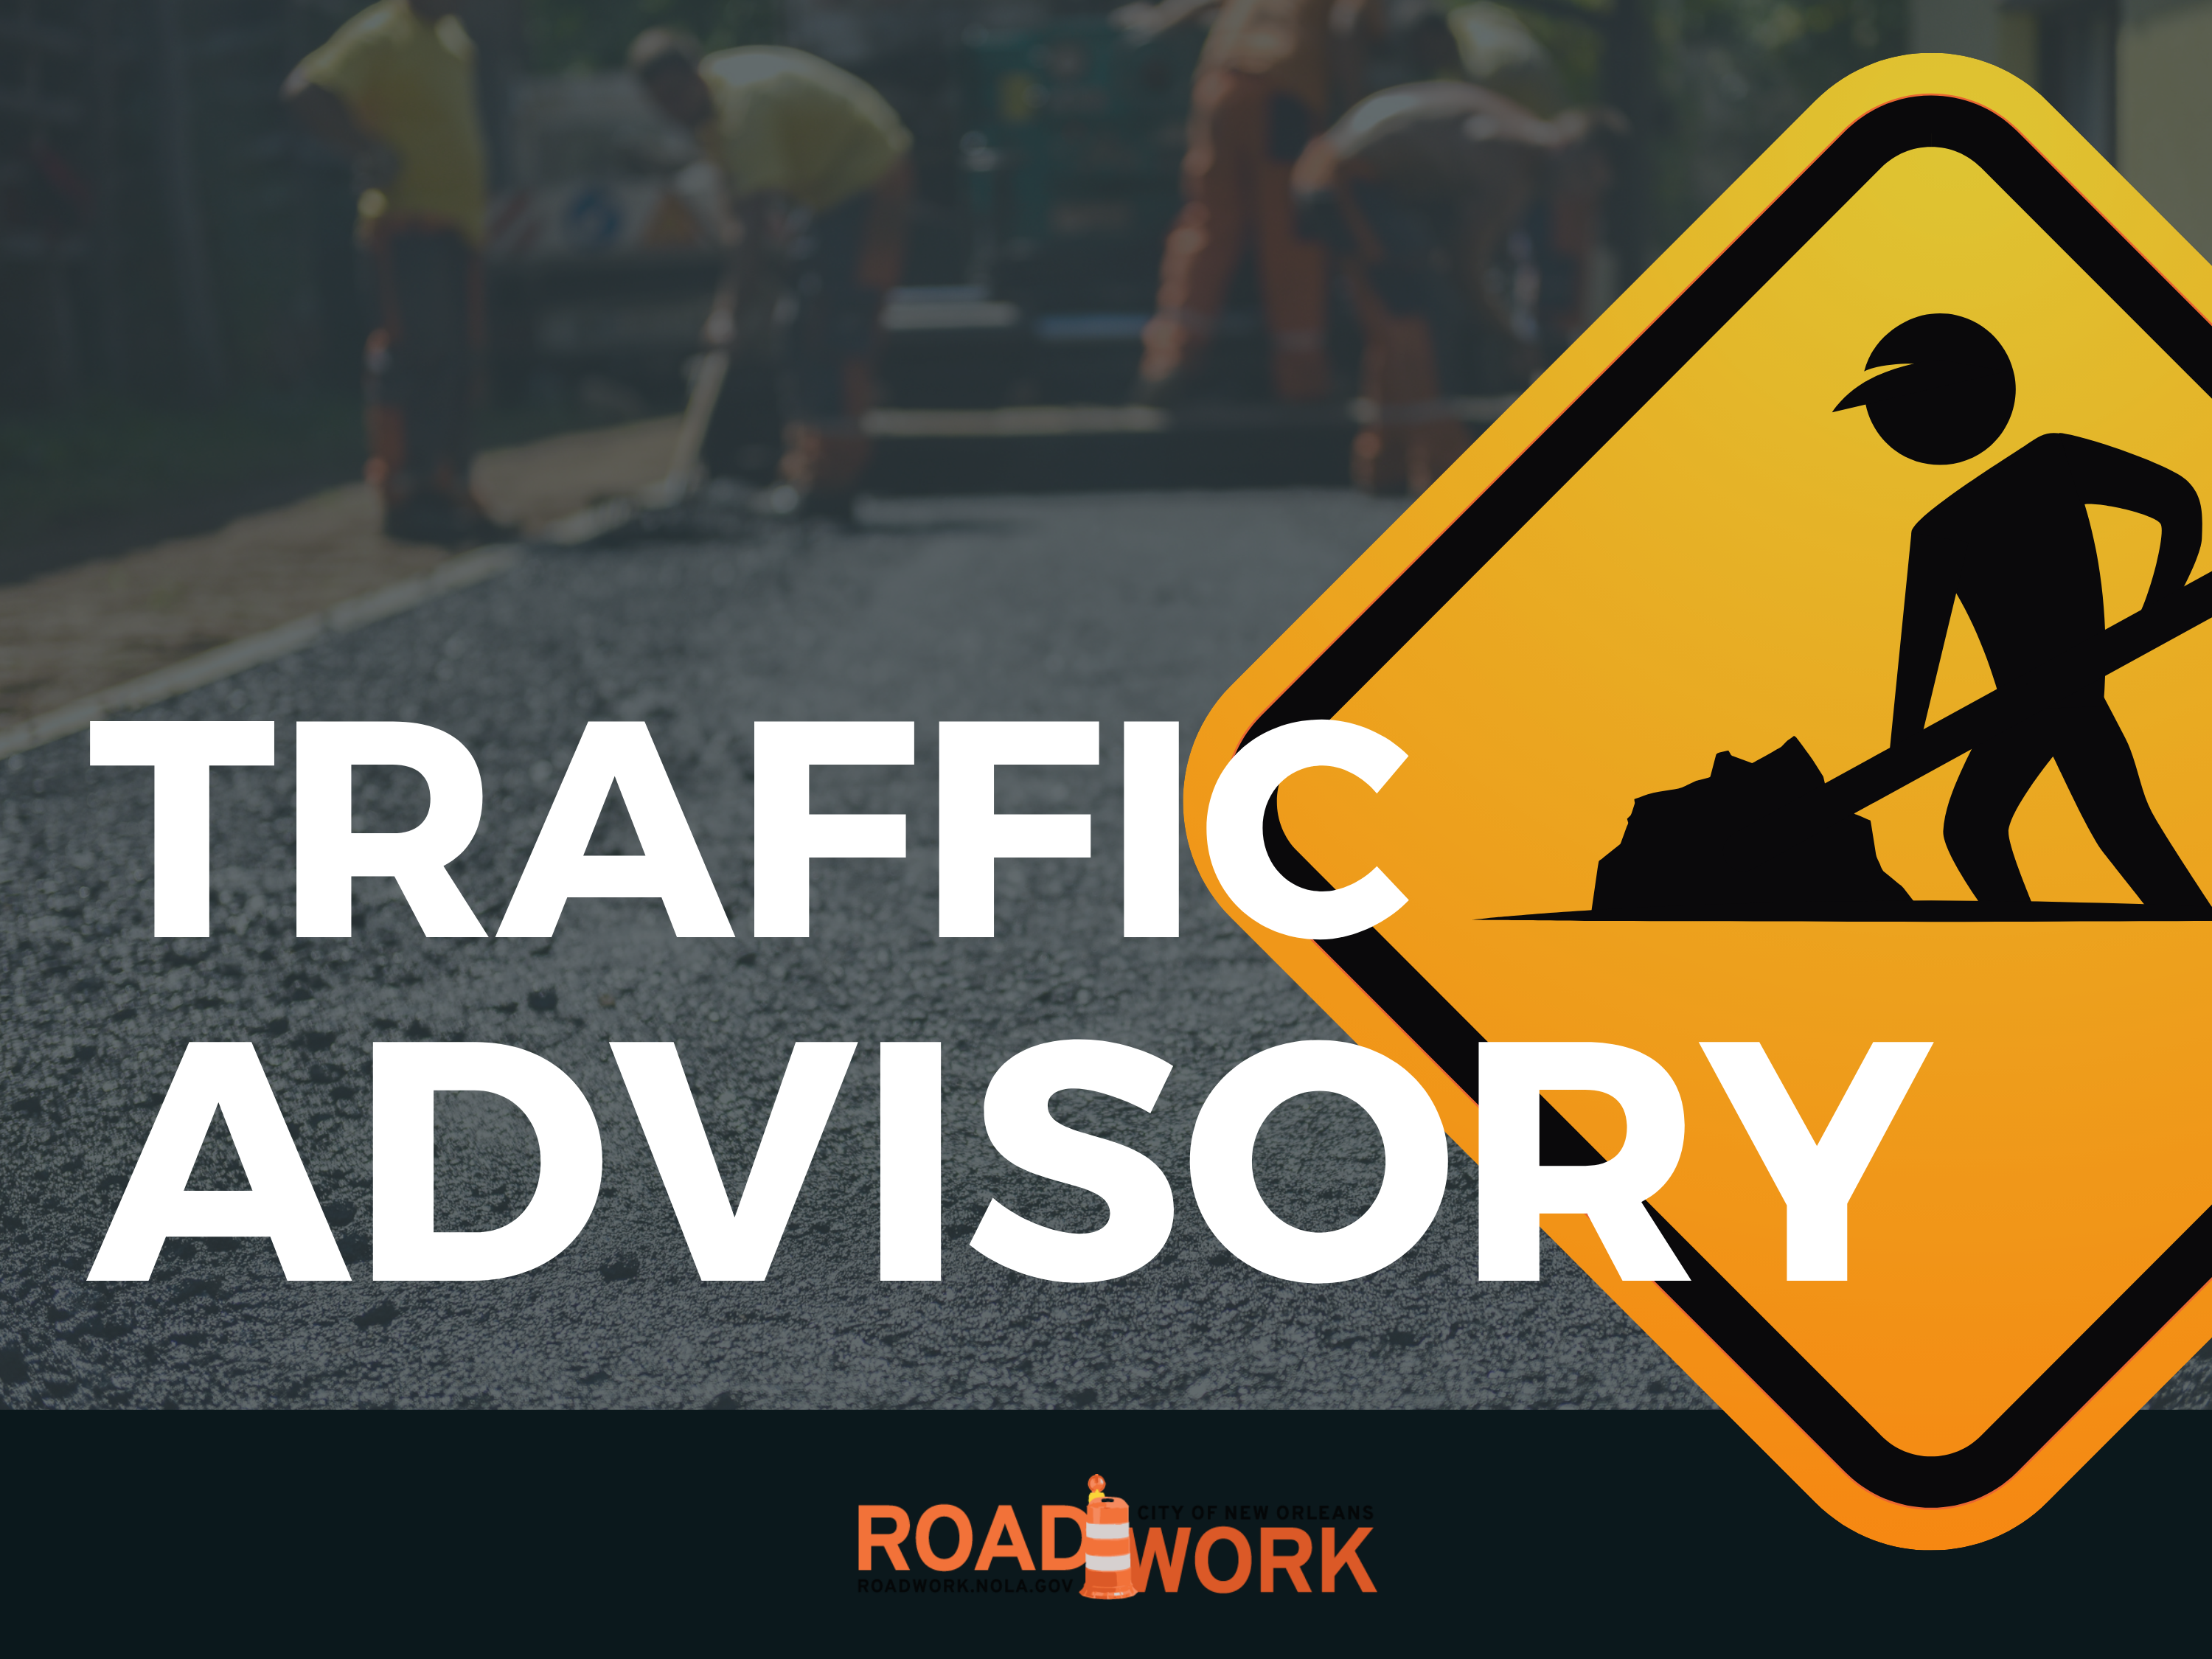 TRAFFIC ADVISORY: TEMPORARY ROAD CLOSURE ON PRENTISS AVENUE AT OLD SPANISH TRAIL INTERSECTION